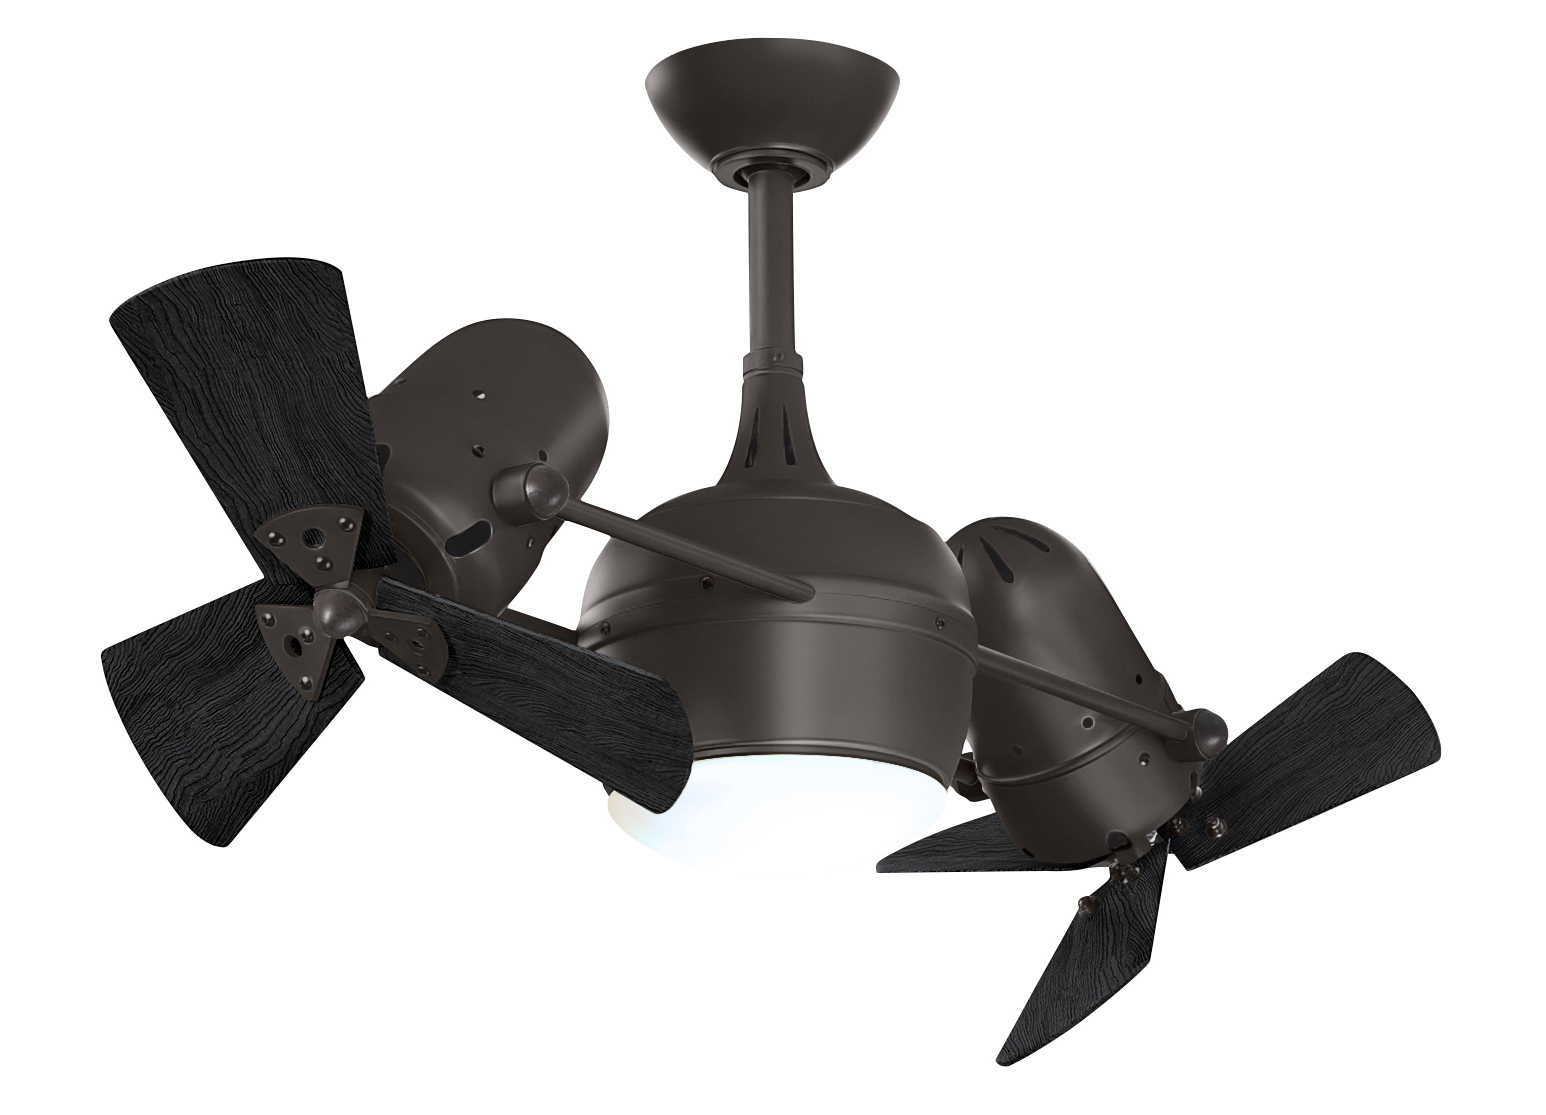 Dagny-LK Rotational Fan in Textured Bronze with Matte Black Wood Blades